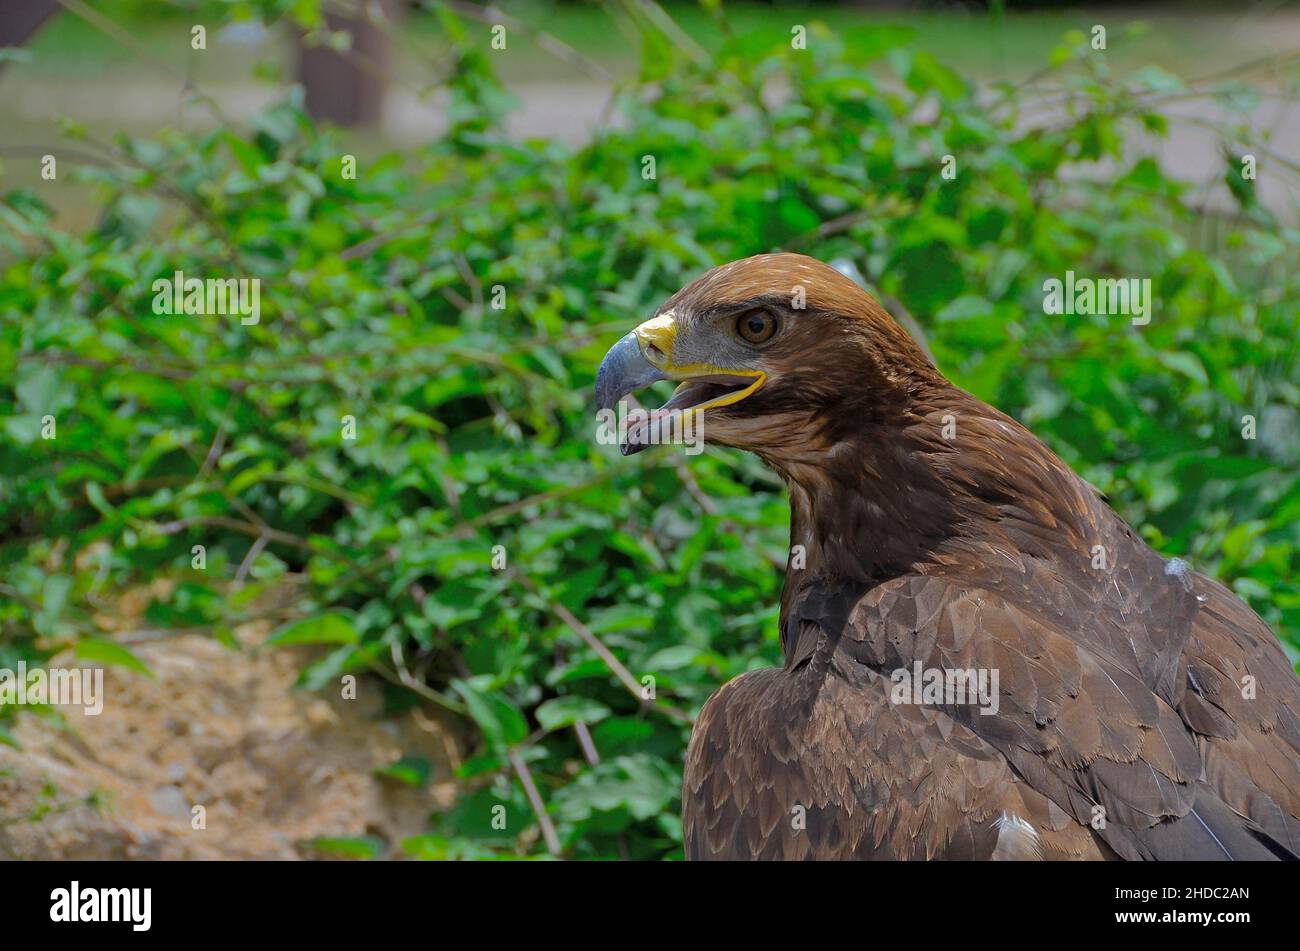 Golden eagle with open beak and tongue, zoo Stock Photo - Alamy